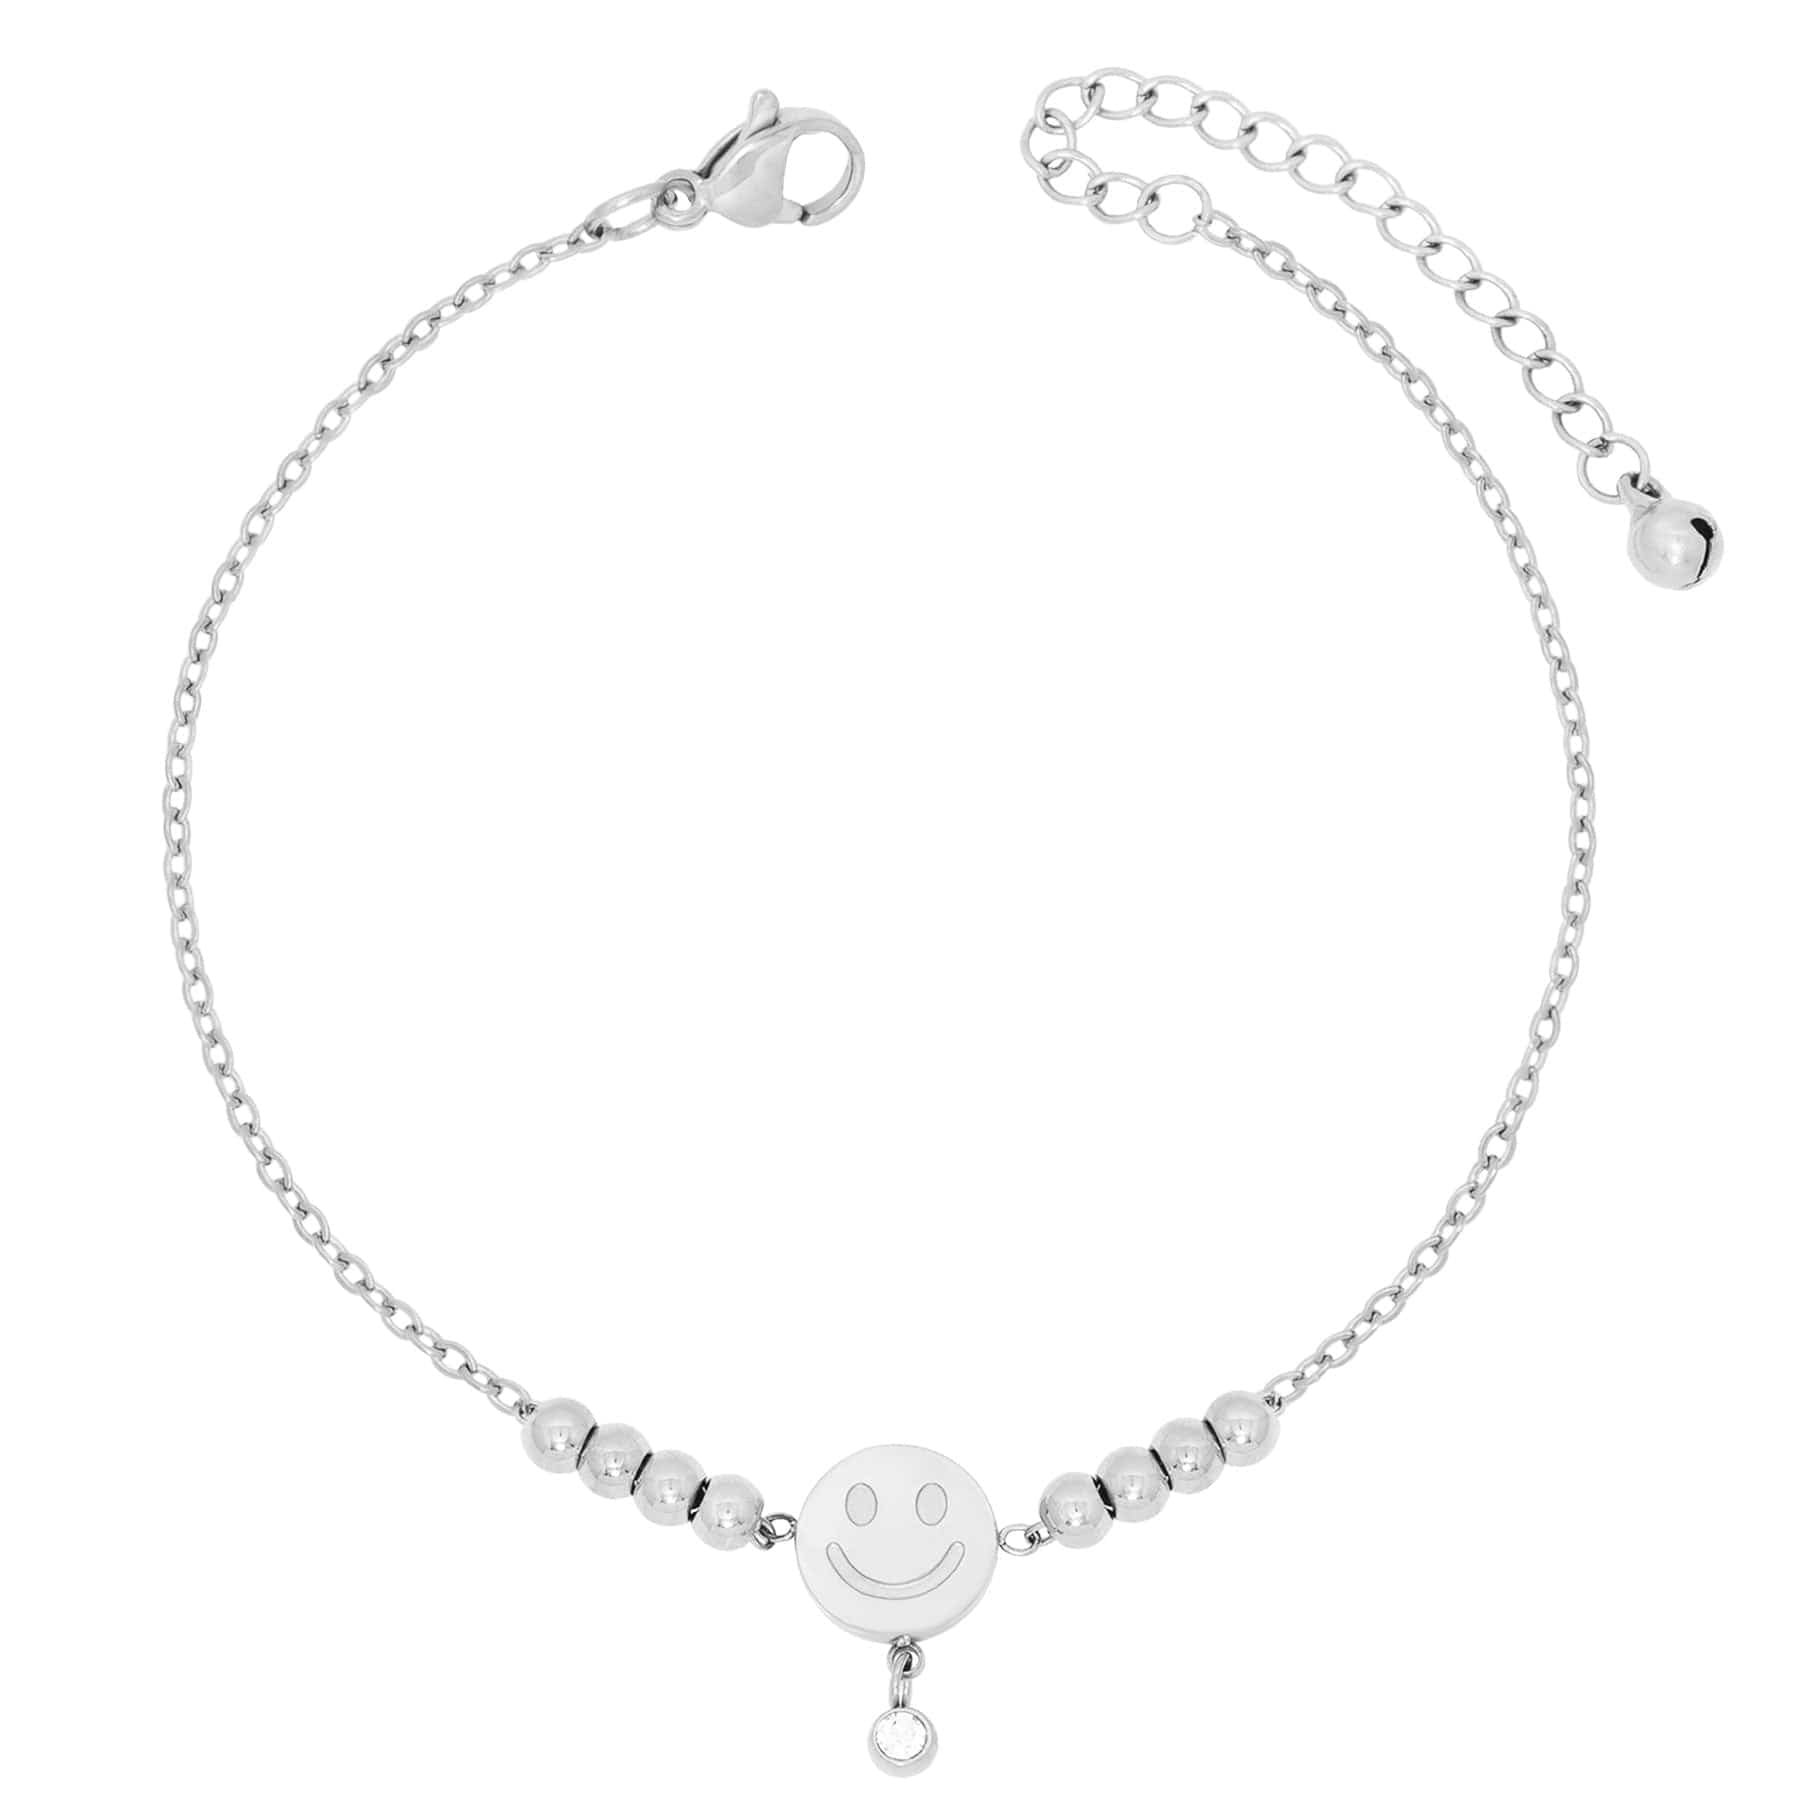 BohoMoon Stainless Steel Smiley Anklet